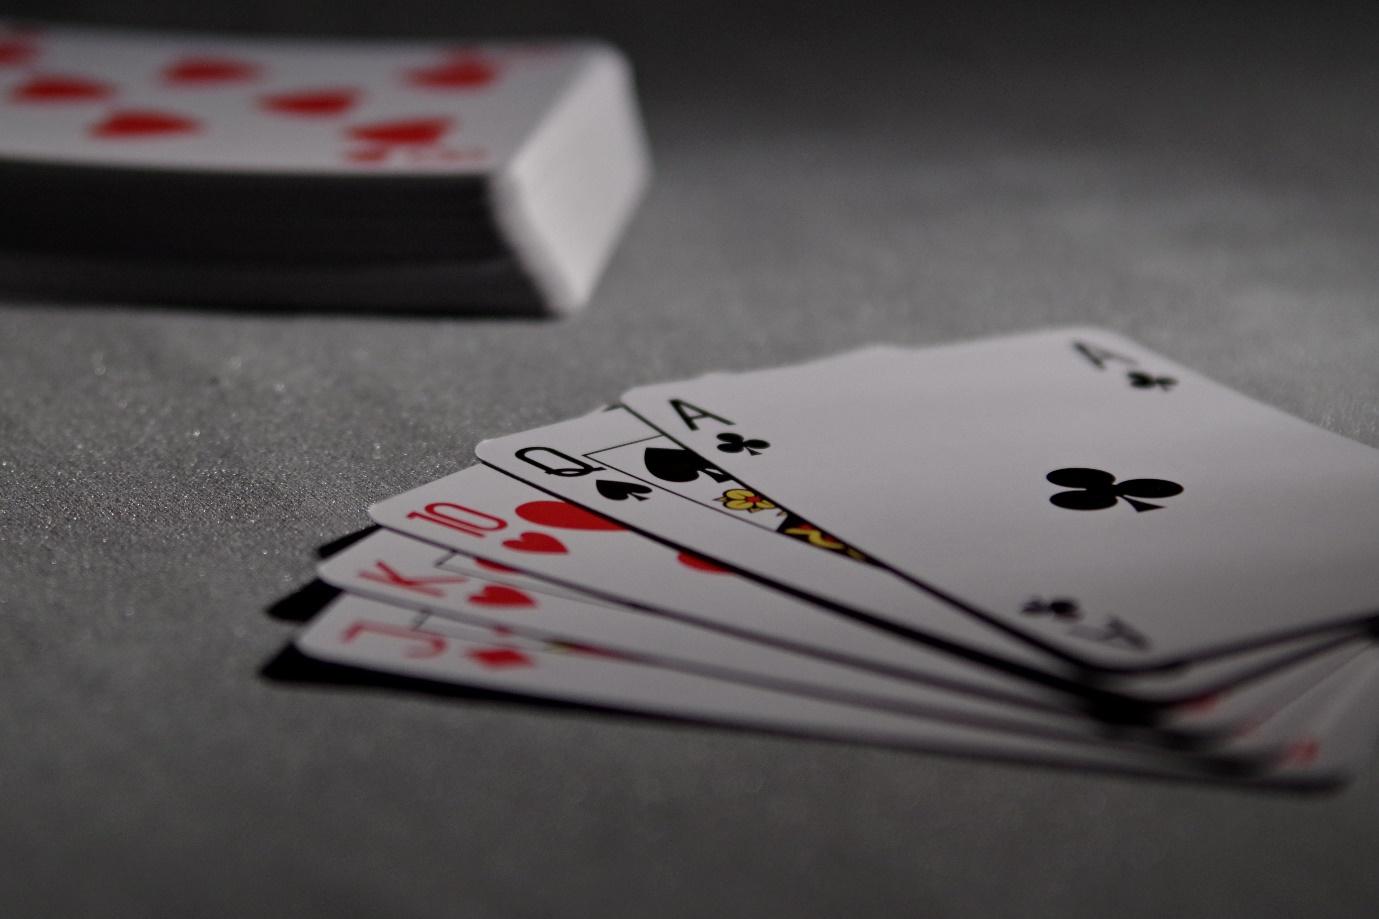 A deck of cards and a deck of cards

Description automatically generated